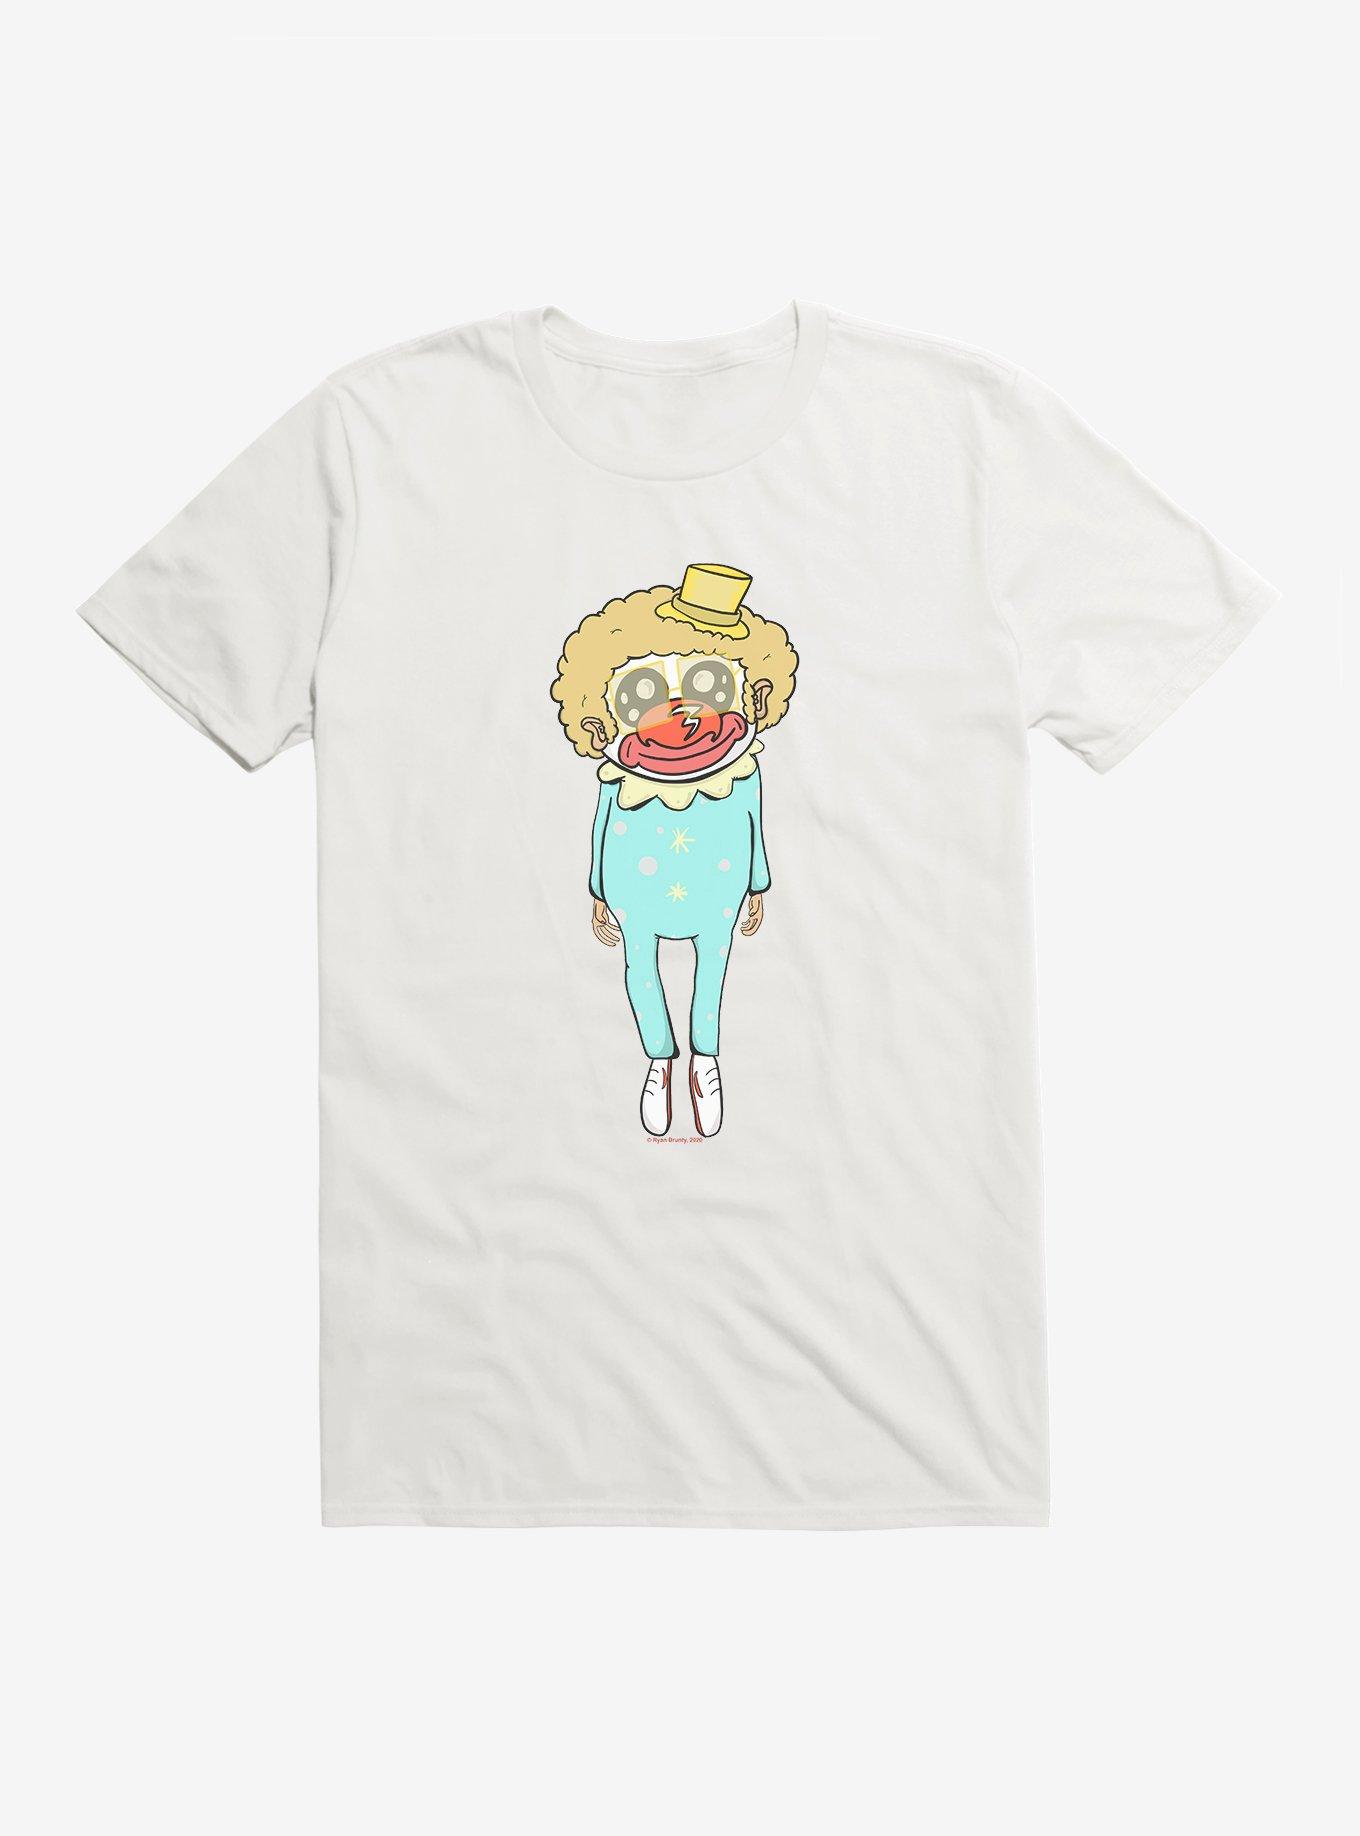 Depressed Monsters Clown Suited Casey The T-Shirt By Ryan Brunty